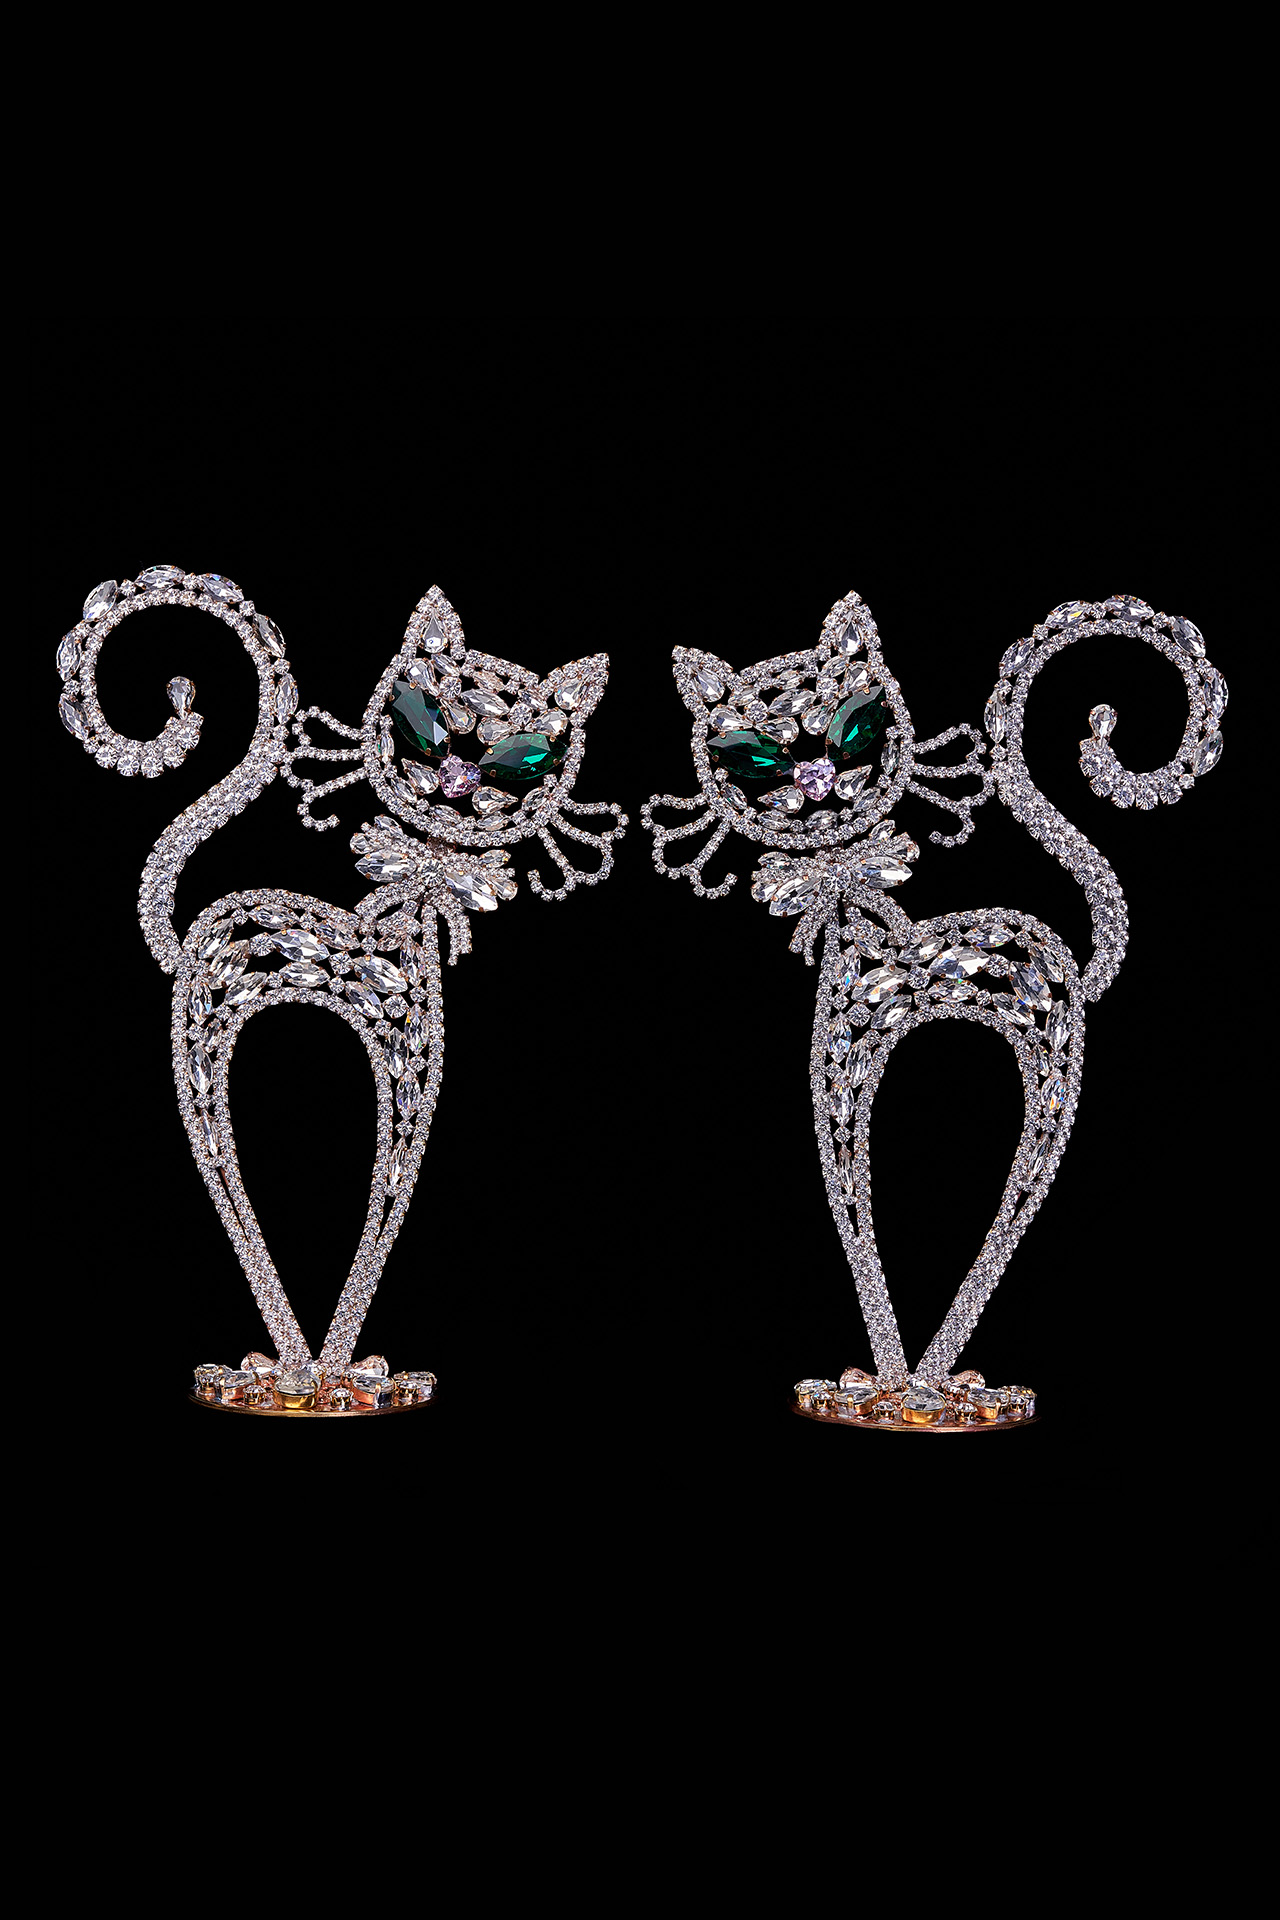 Rhinestones twin cats decoration handmade from clear crystals